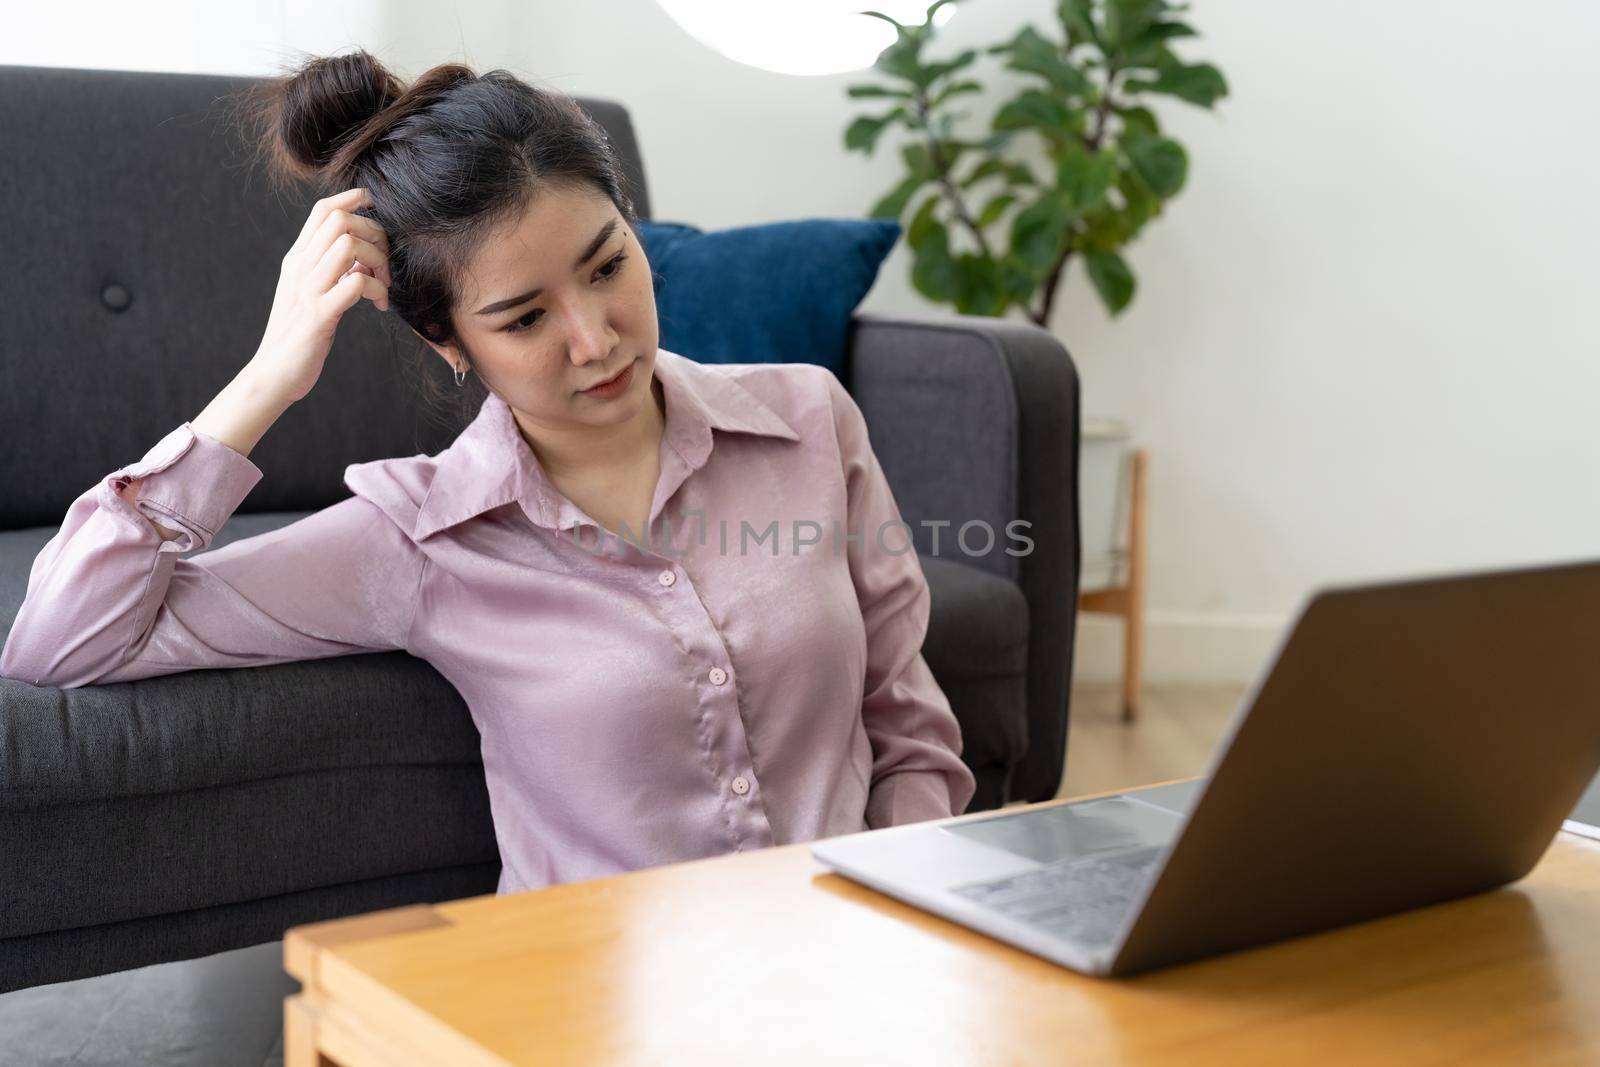 Stressed asian woman having headache while working using laptop computer at home. stressed and depressed.